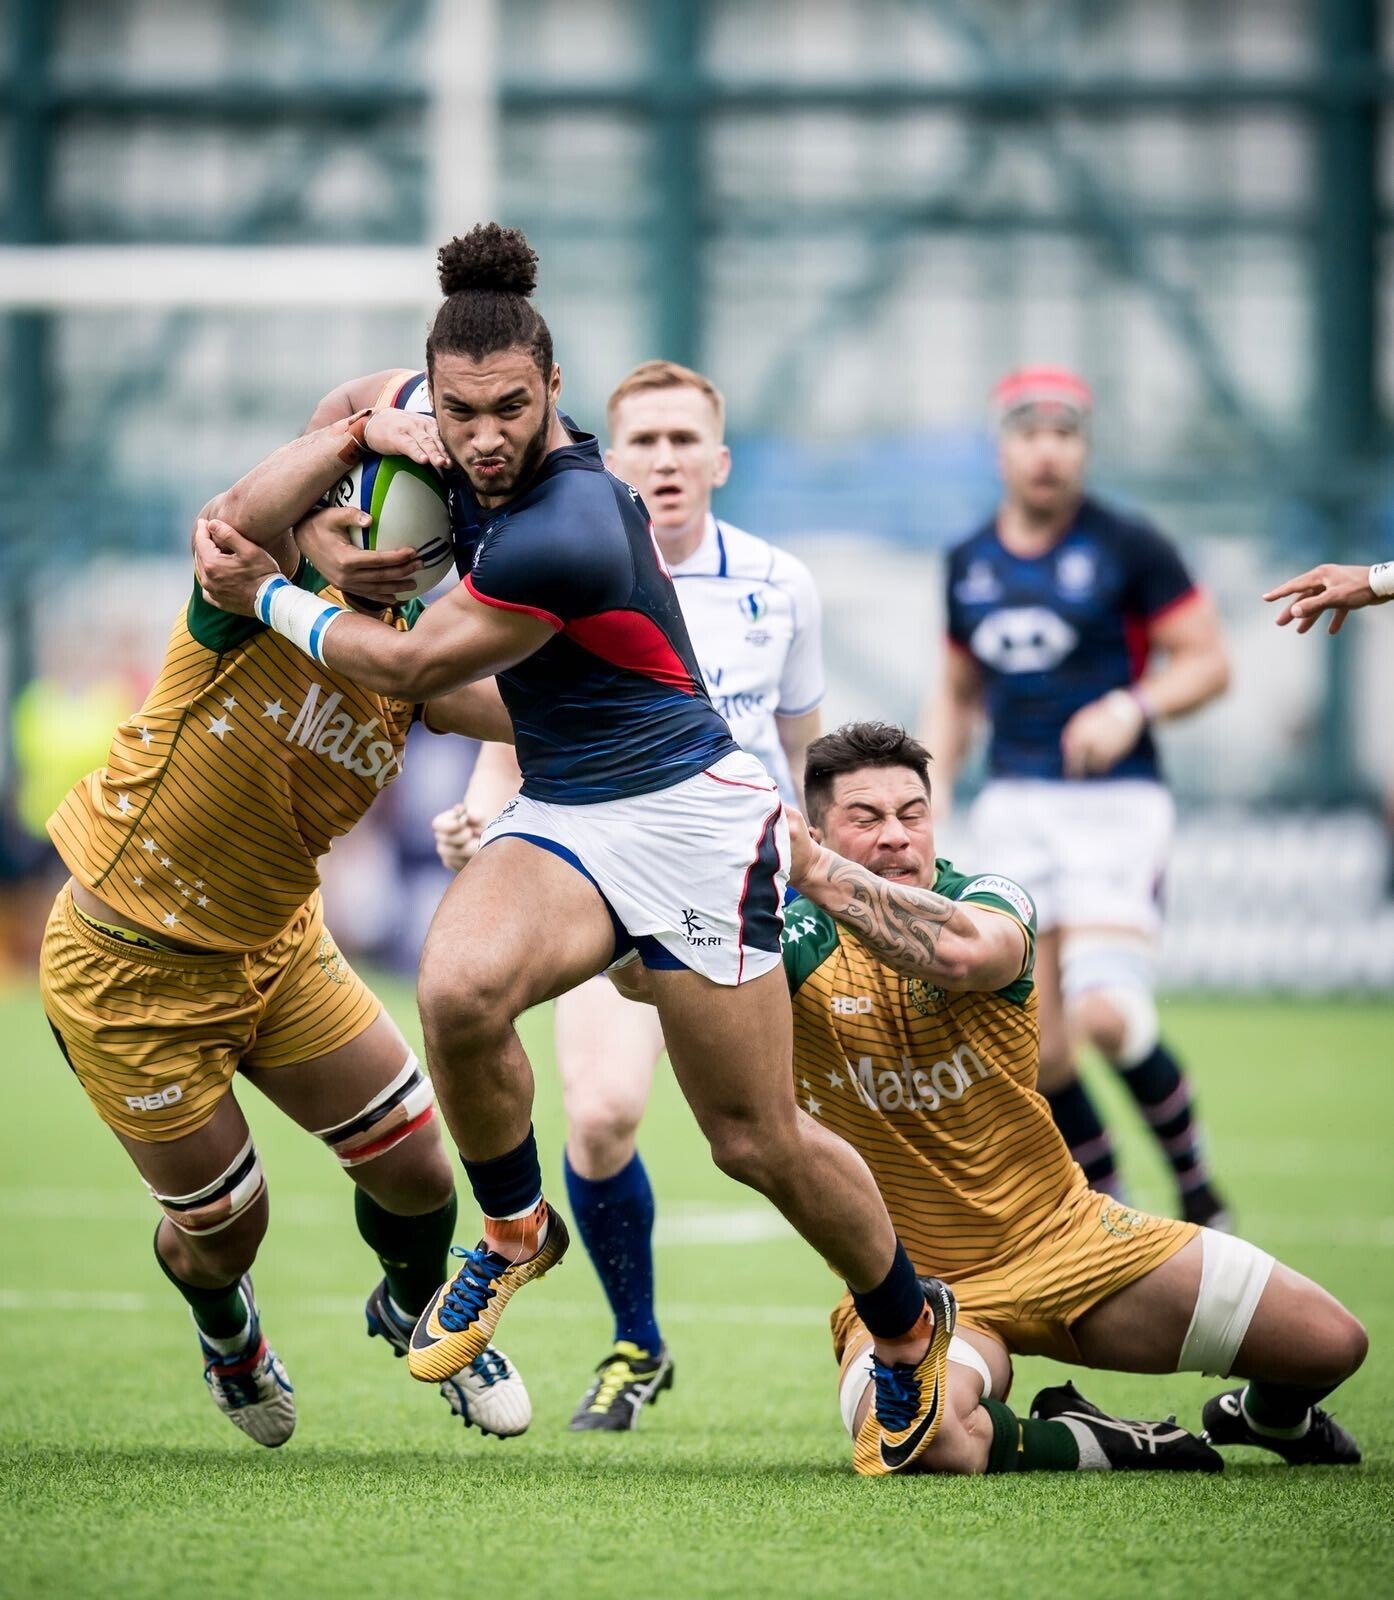 Max Denmark busts through against the Cook Islands, en route to the round robin tournament for the last 2019 Rugby World Cup spot. Photo: Handout